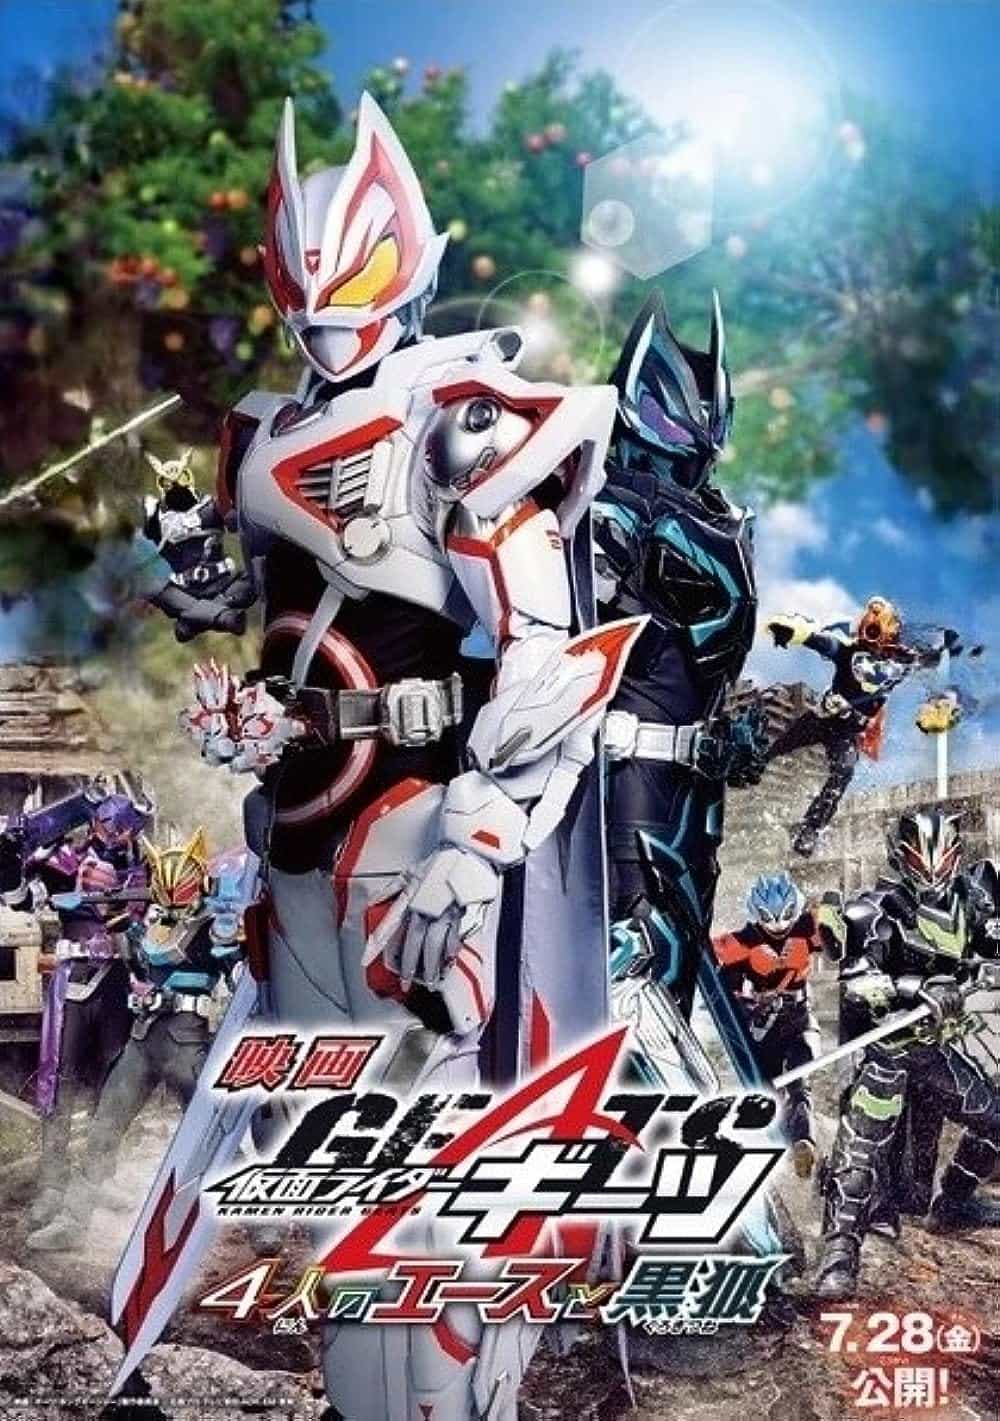 Kamen Rider Geats: 4 Aces and the Black Fox